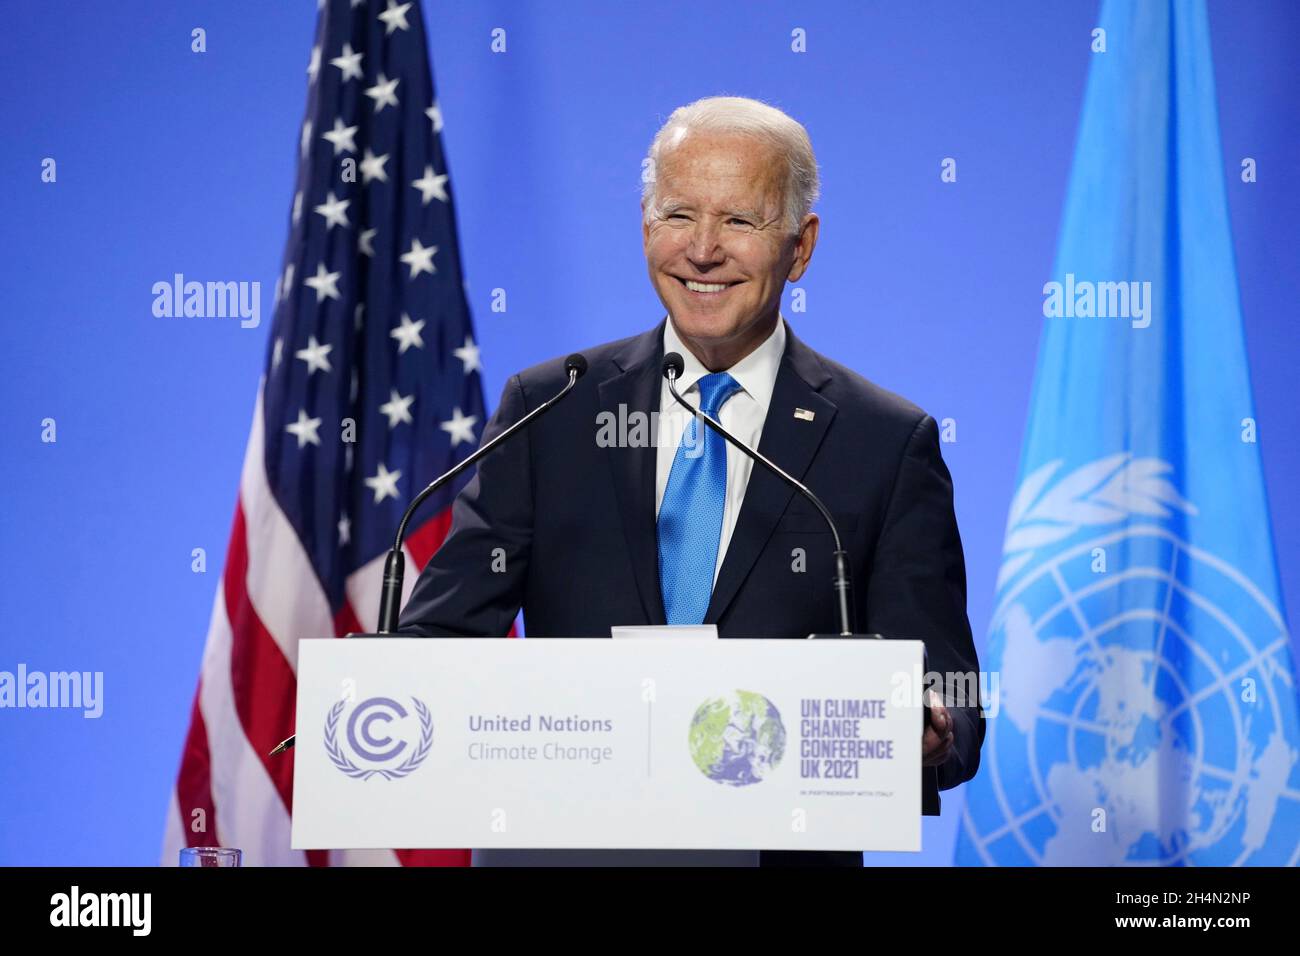 Glasgow, United Kingdom. 02nd Nov, 2021. U.S President Joe Biden holds a press conference at the conclusion of the leaders gathering of the COP26 U.N. Climate Summit at the Glasgow Science Centre November 2, 2021 in Glasgow, Scotland. Credit: Adam Schultz/White House Photo/Alamy Live News Stock Photo